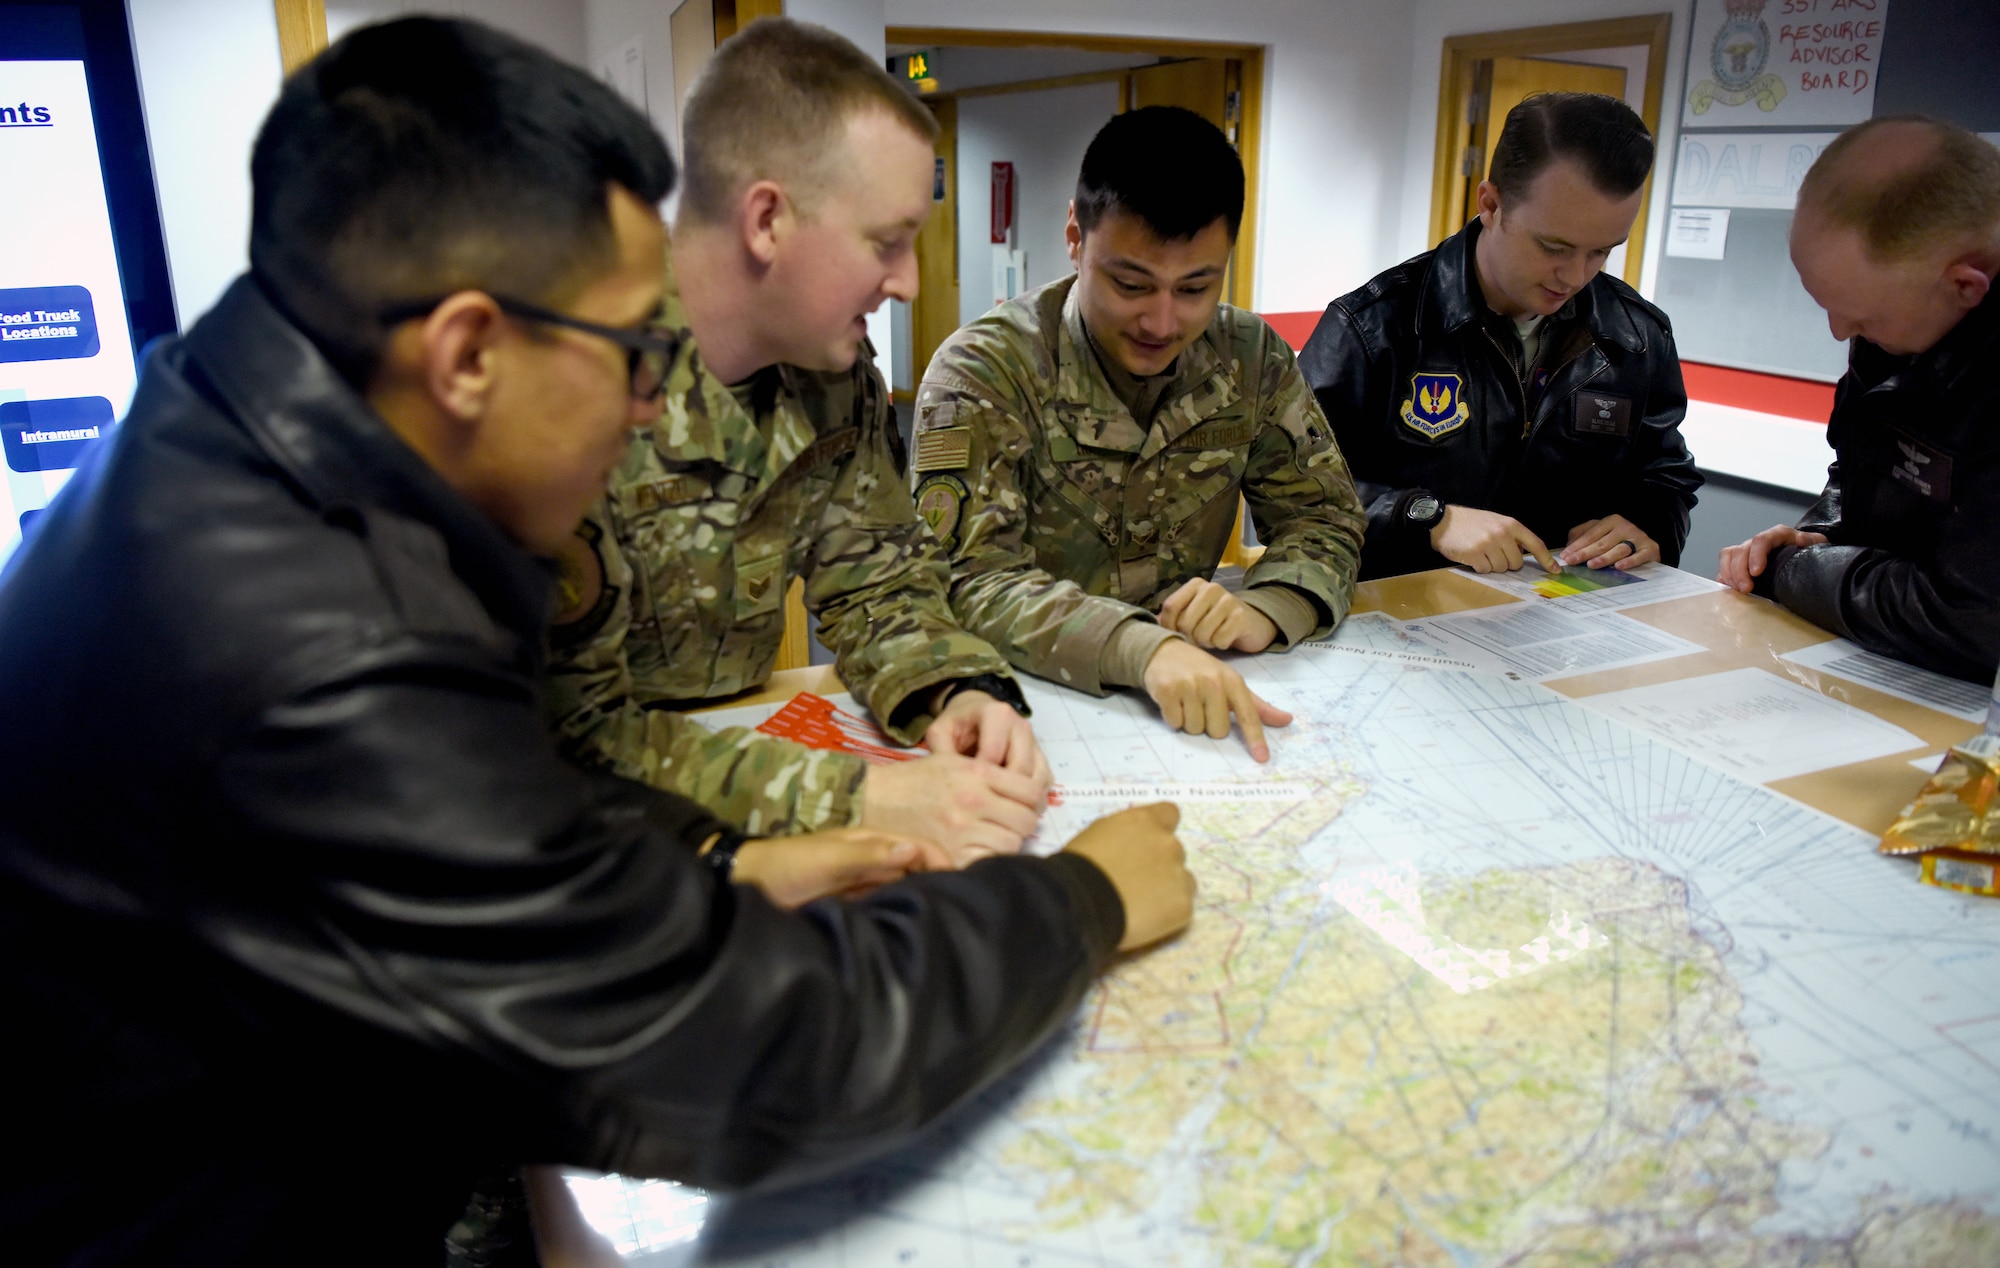 Airmen with the 100th Operations Support Squadron and 351st Air Refueling Squadron discuss potential combat crew communication practices during a briefing at RAF Mildenhall, England, Dec. 3, 2019. The combat crew communications shop’s main goal is to ensure the security of all aircrew communications during their flights. This includes training aircrew on the use of a variety of materials to help securely talk over the air. (U.S. Air Force photo by Senior Airman Brandon Esau)